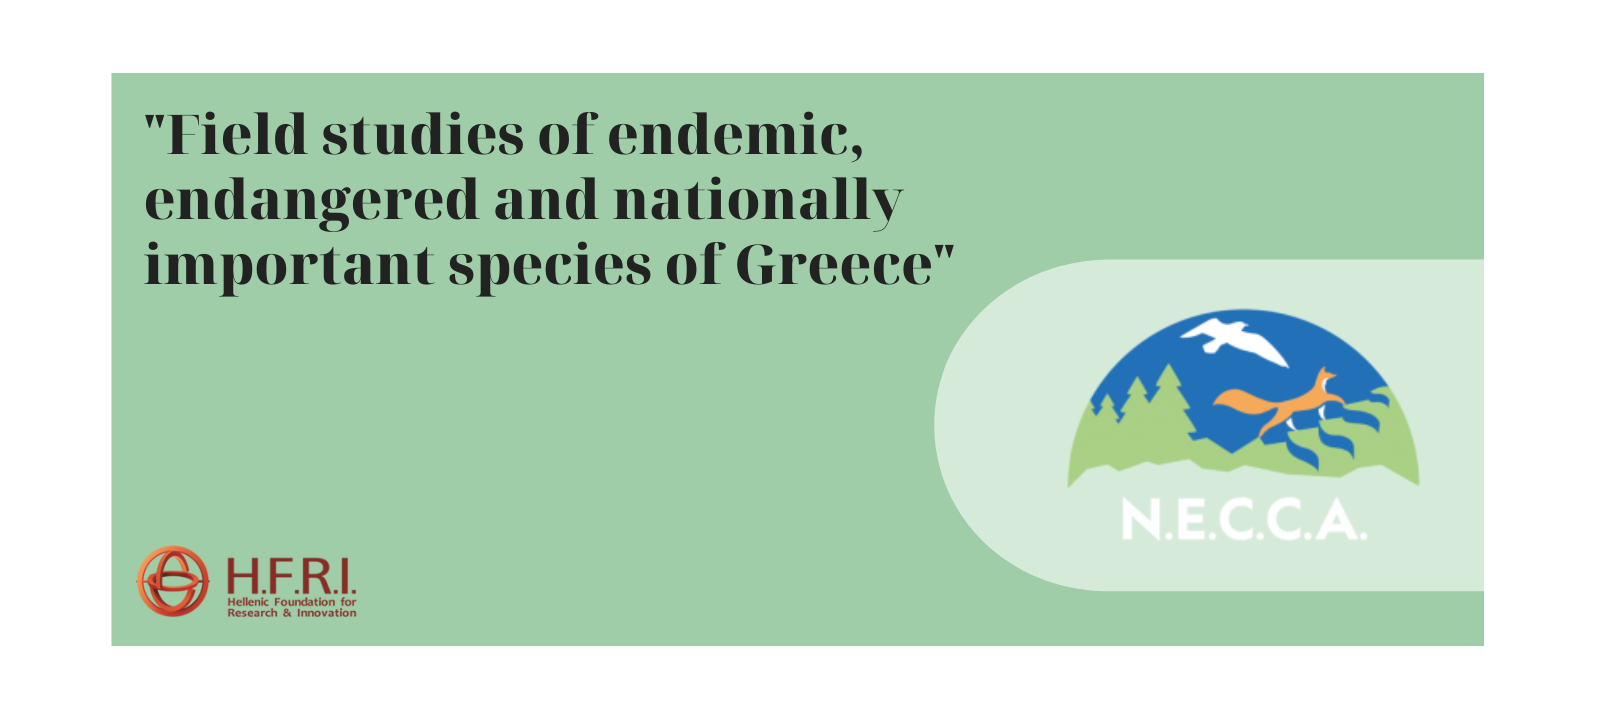 Call for “Actions to protect, conserve and promote biodiversity. Field studies of endemic, endangered and nationally important species of Greece”, funded by the Natural Environment and Climate Change Agency (NECCA)